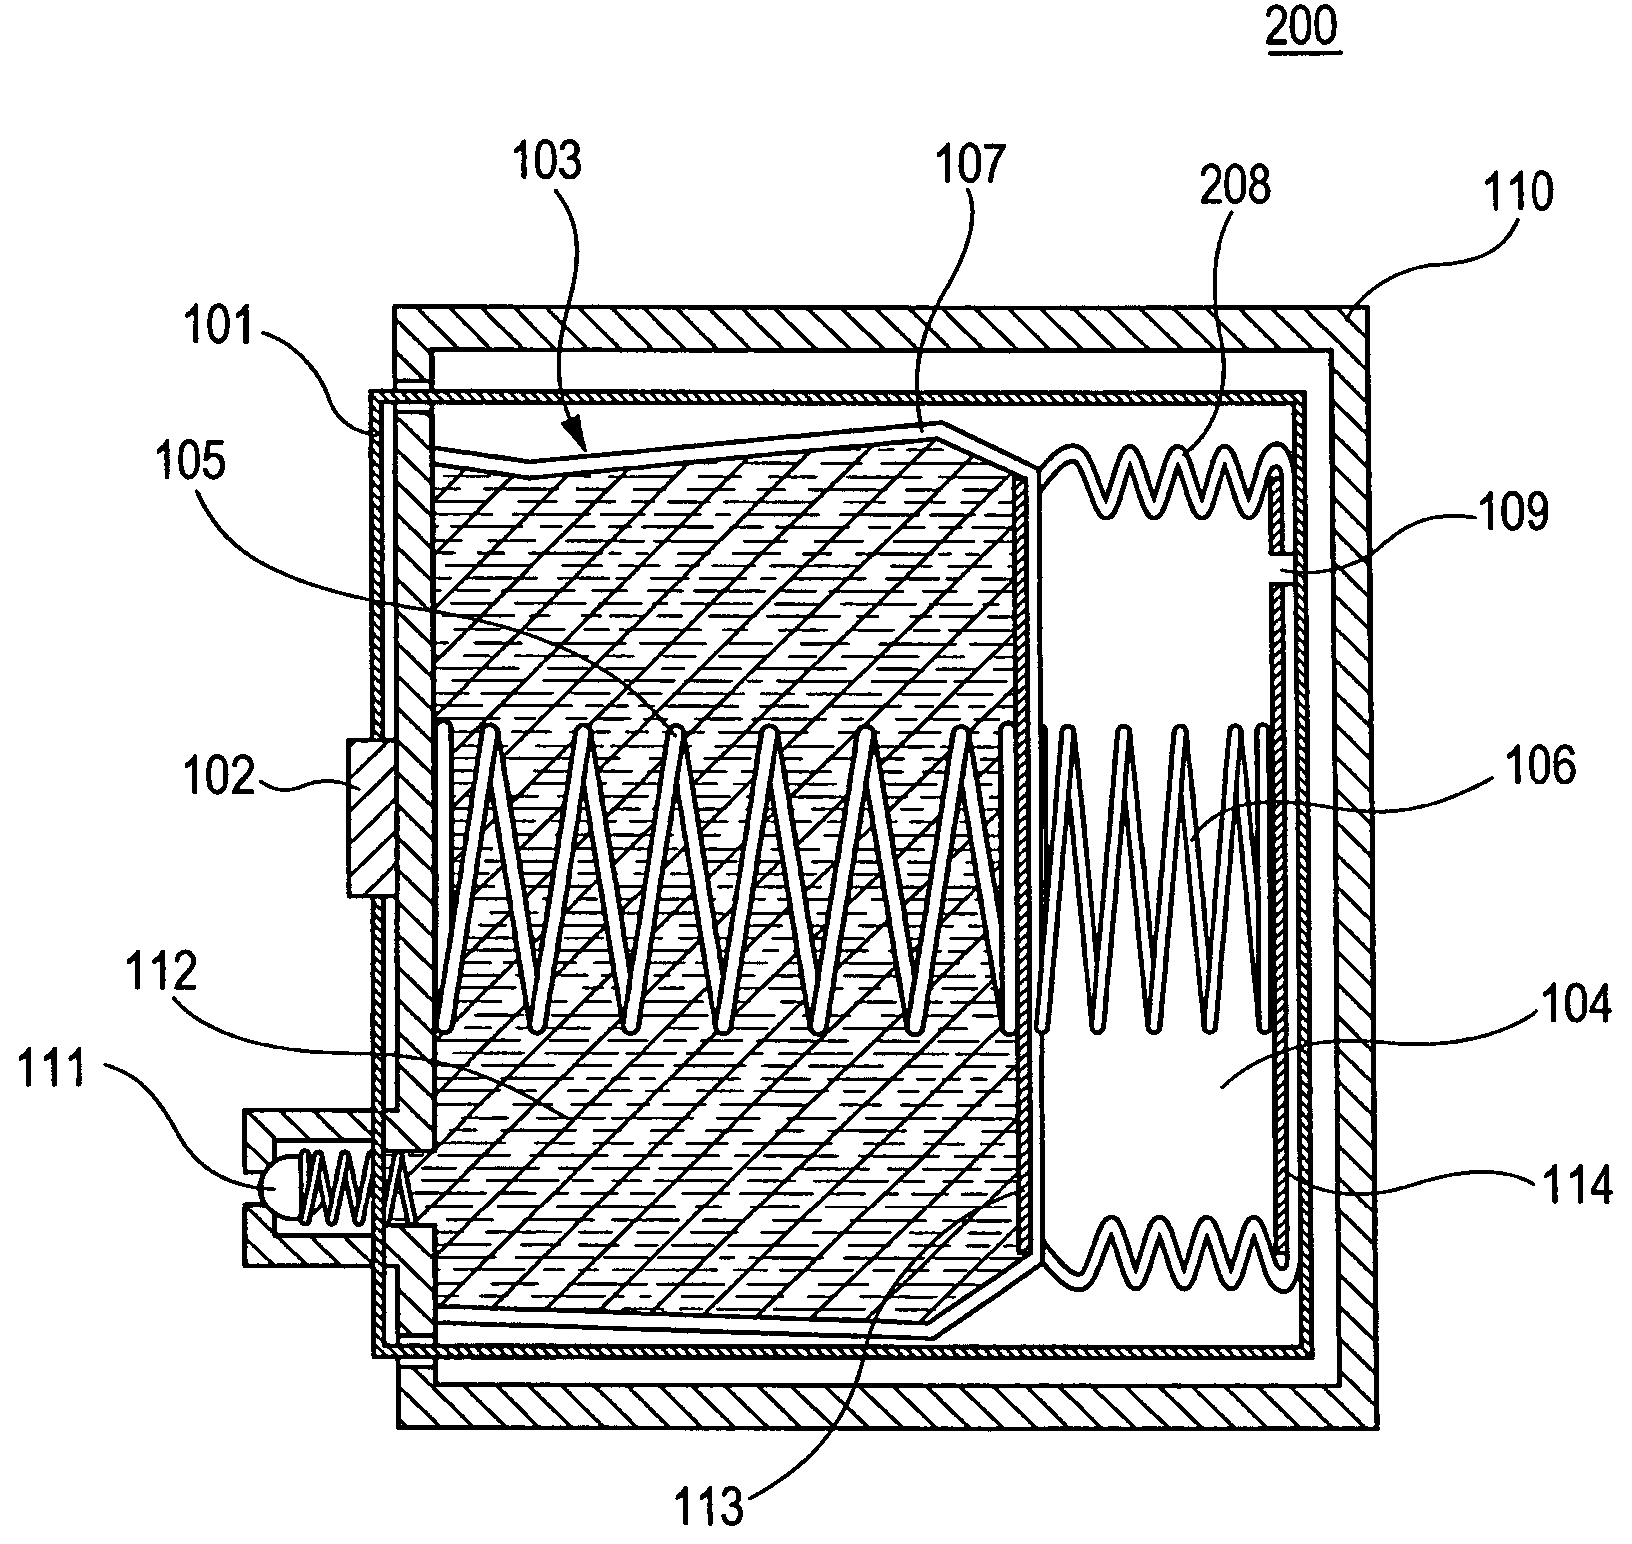 Liquid storage container and liquid ejection recording apparatus having the container mounted thereon